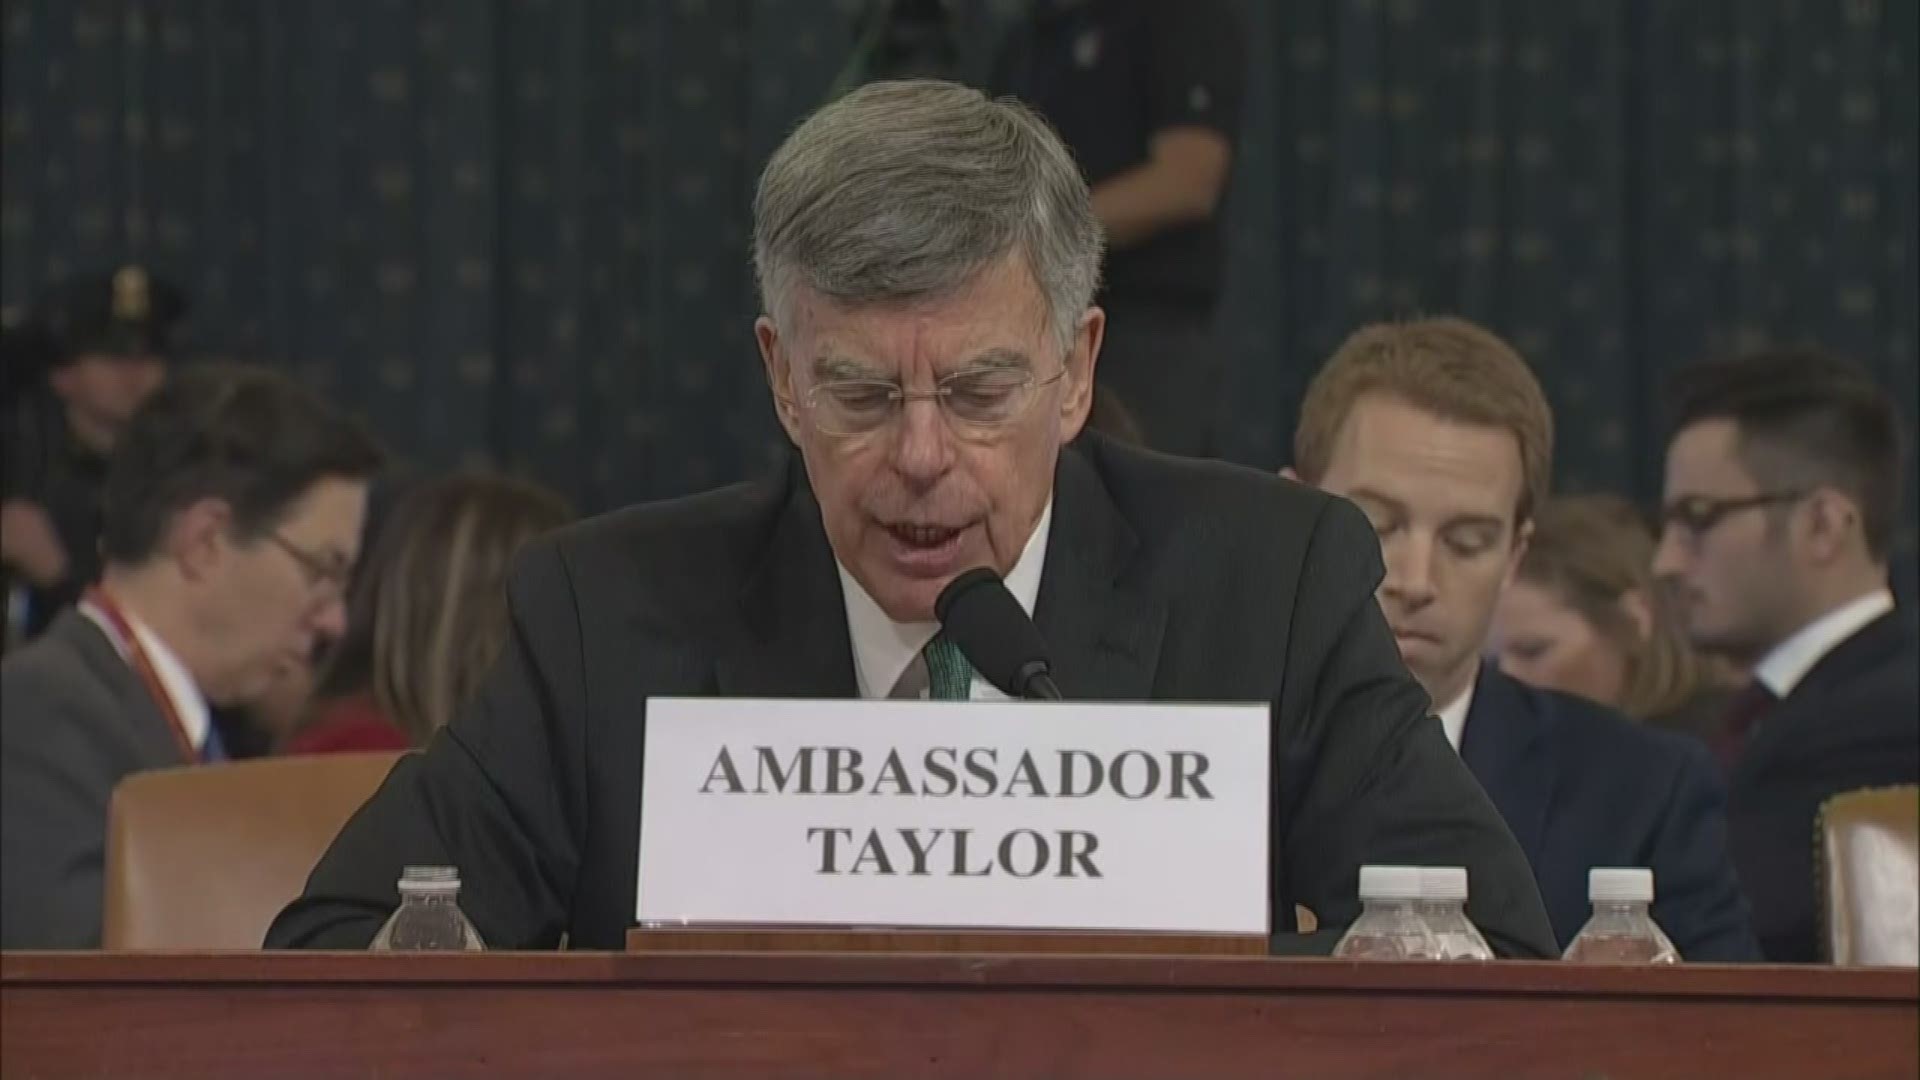 Taylor says it slowly became clear to him that conditions were placed on Ukraine’s new president.